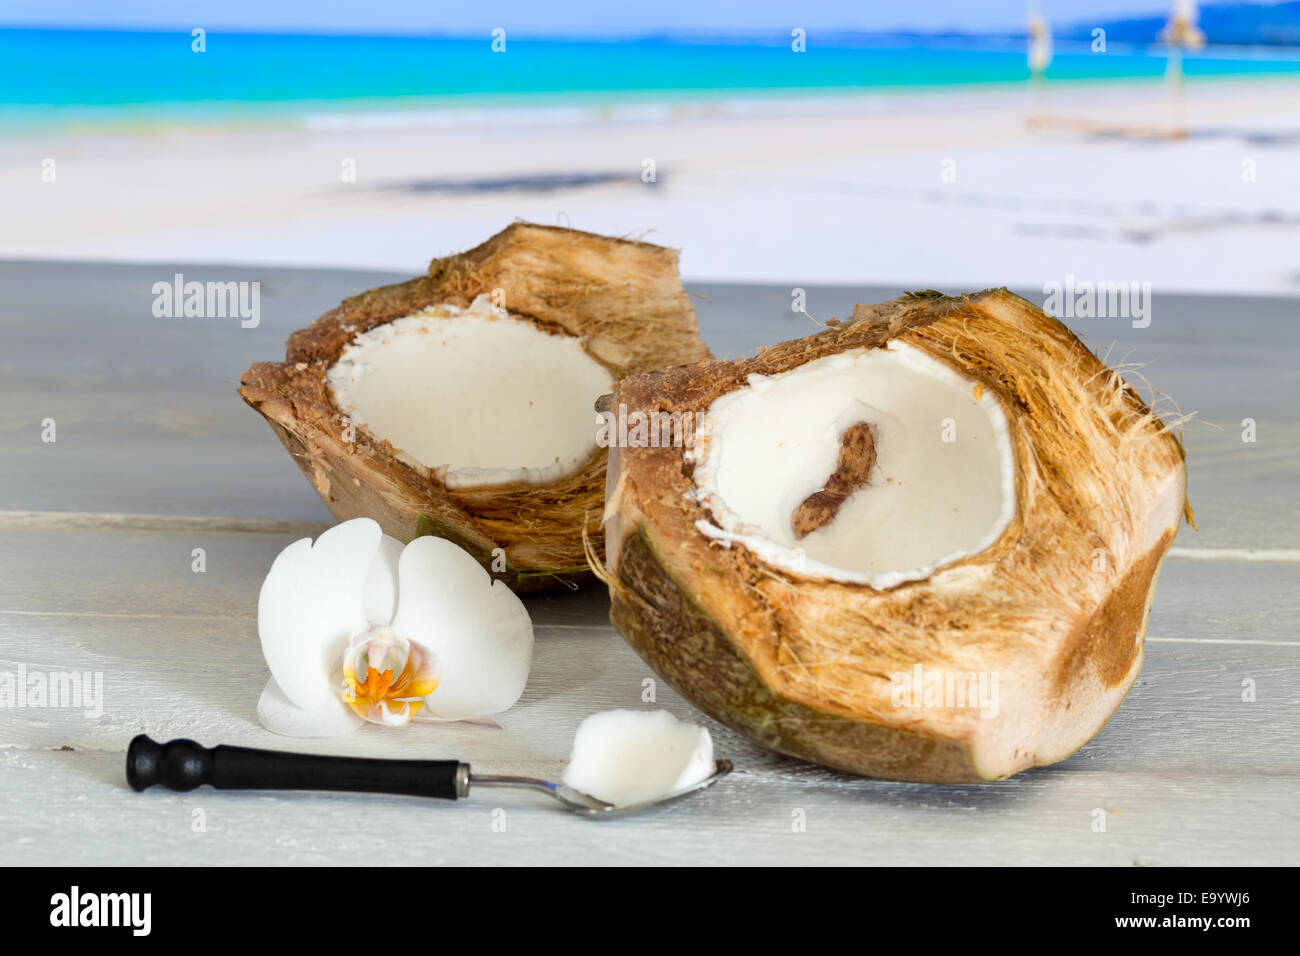 Coconut at beach with bucket and orchid. Stock Photo